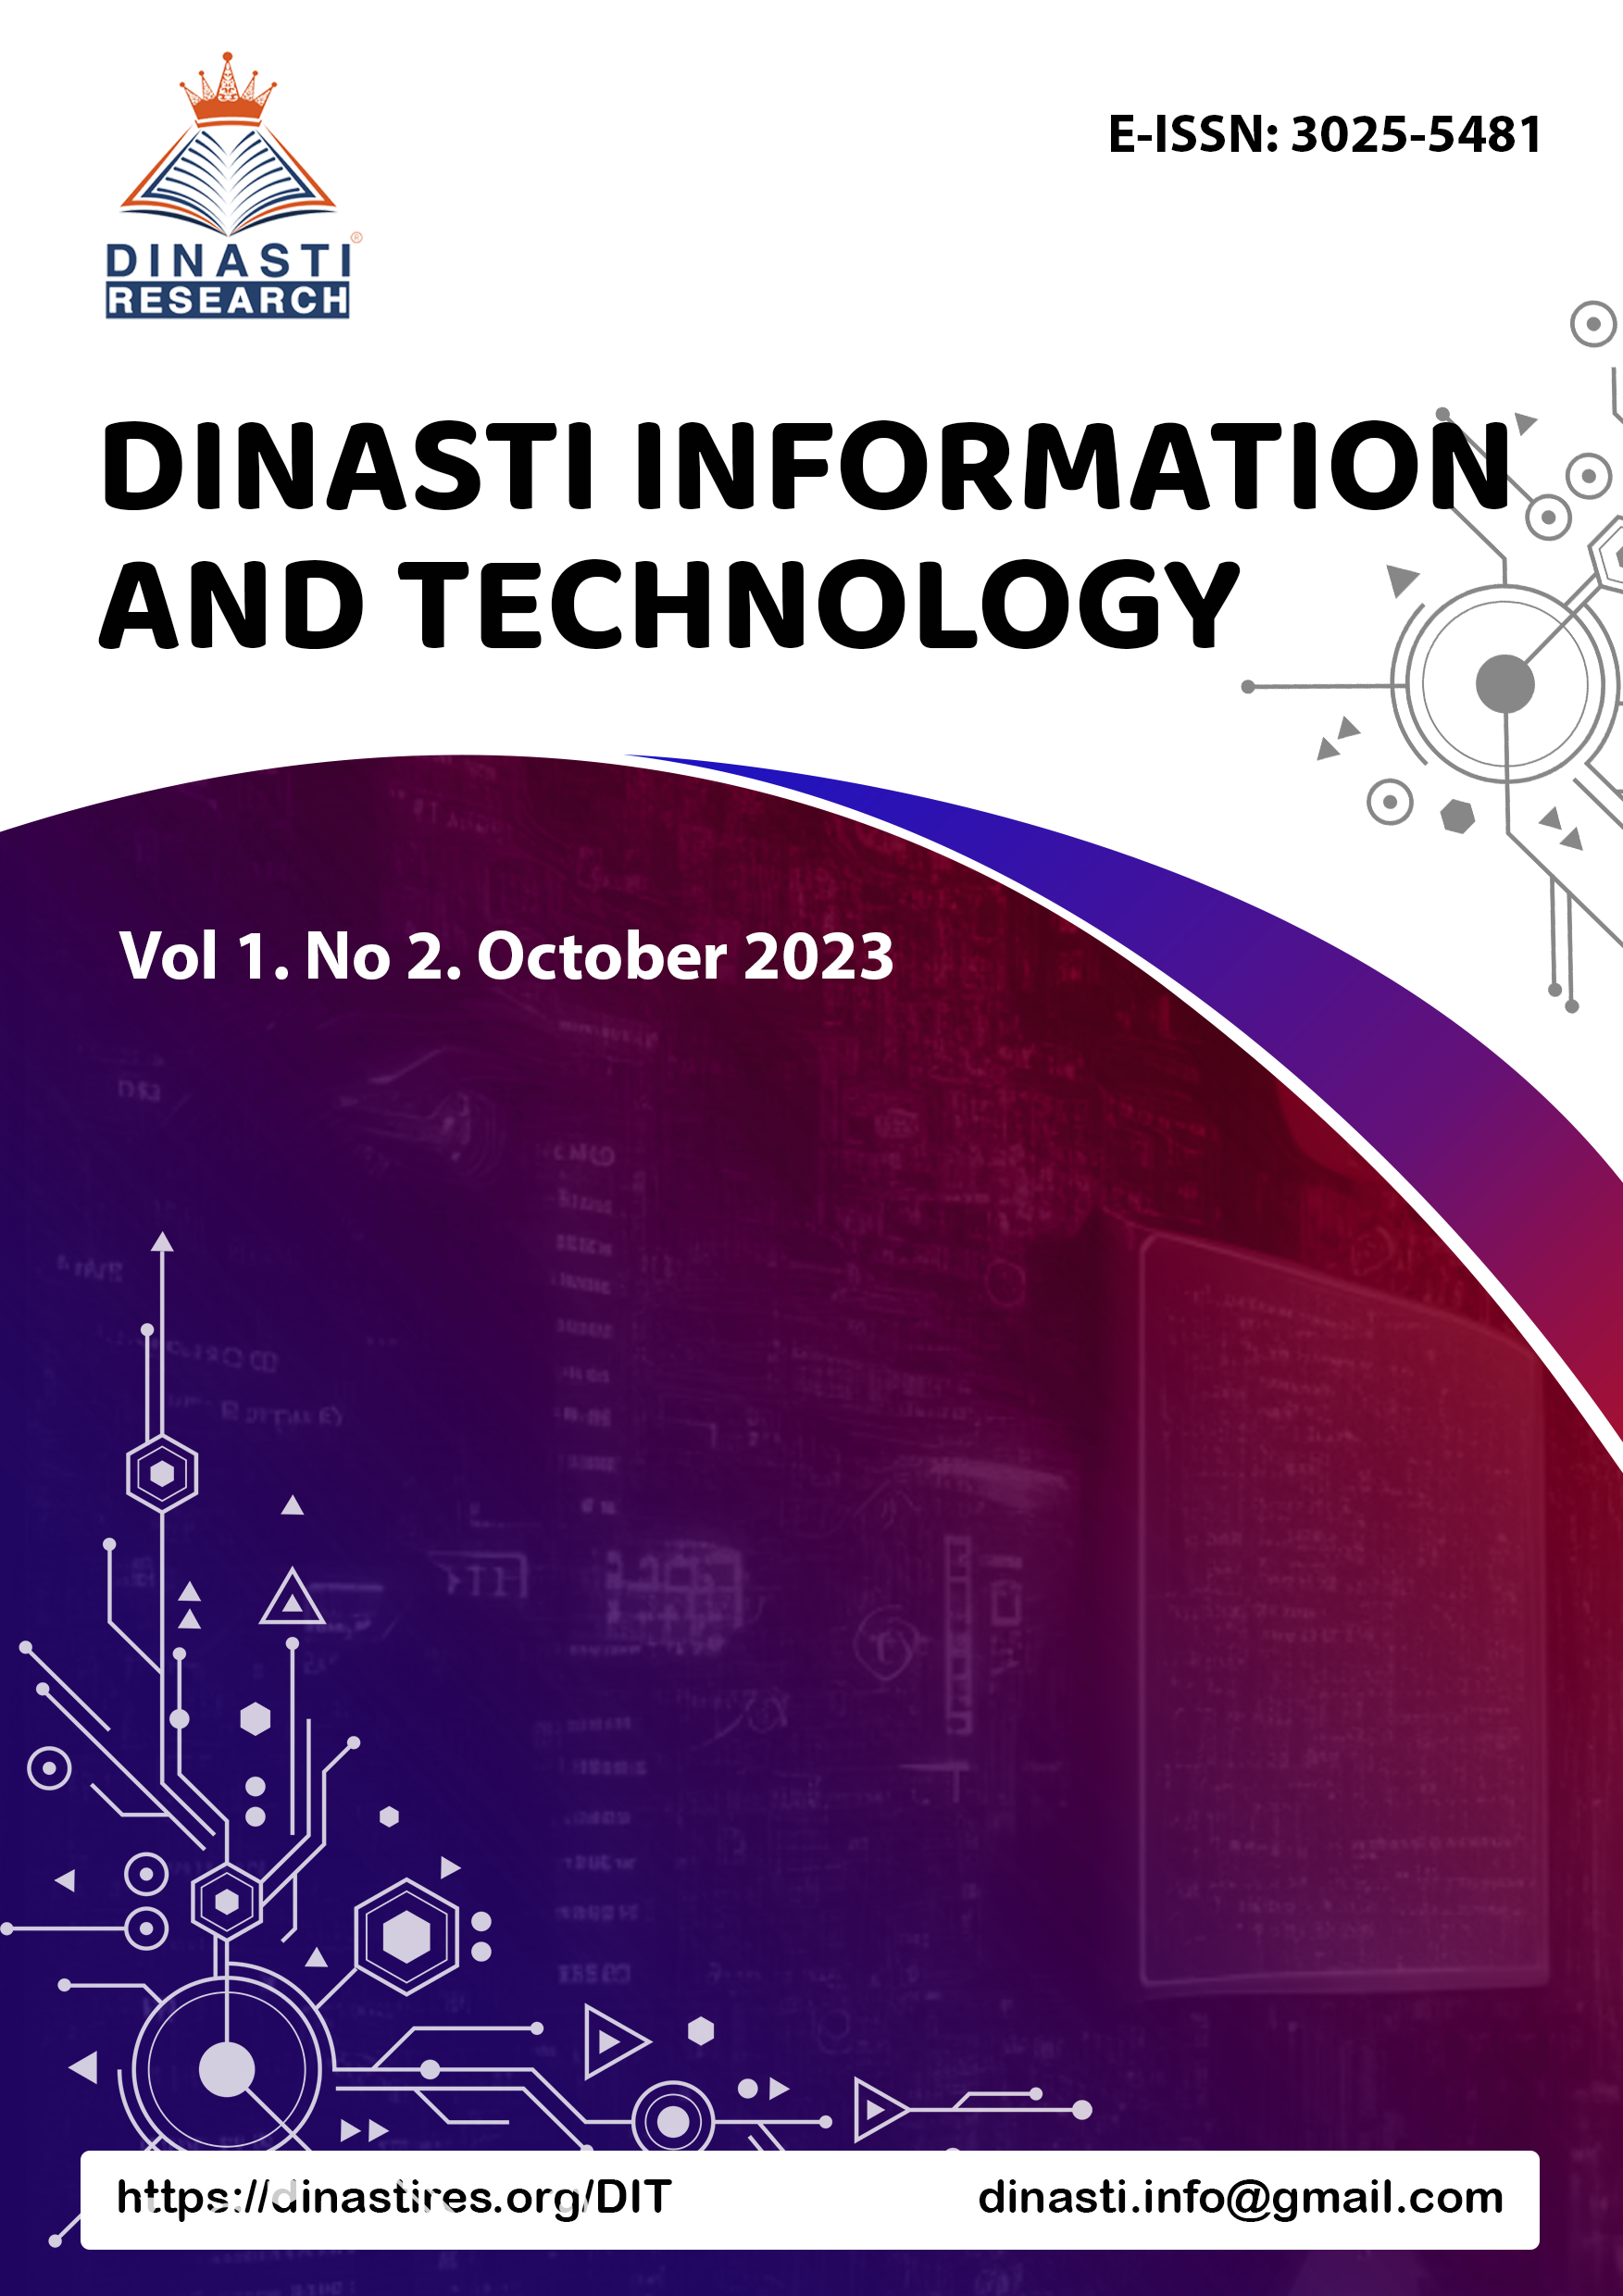 					View Vol. 1 No. 2 (2023): Dinasti Information and Technology (October 2023)
				